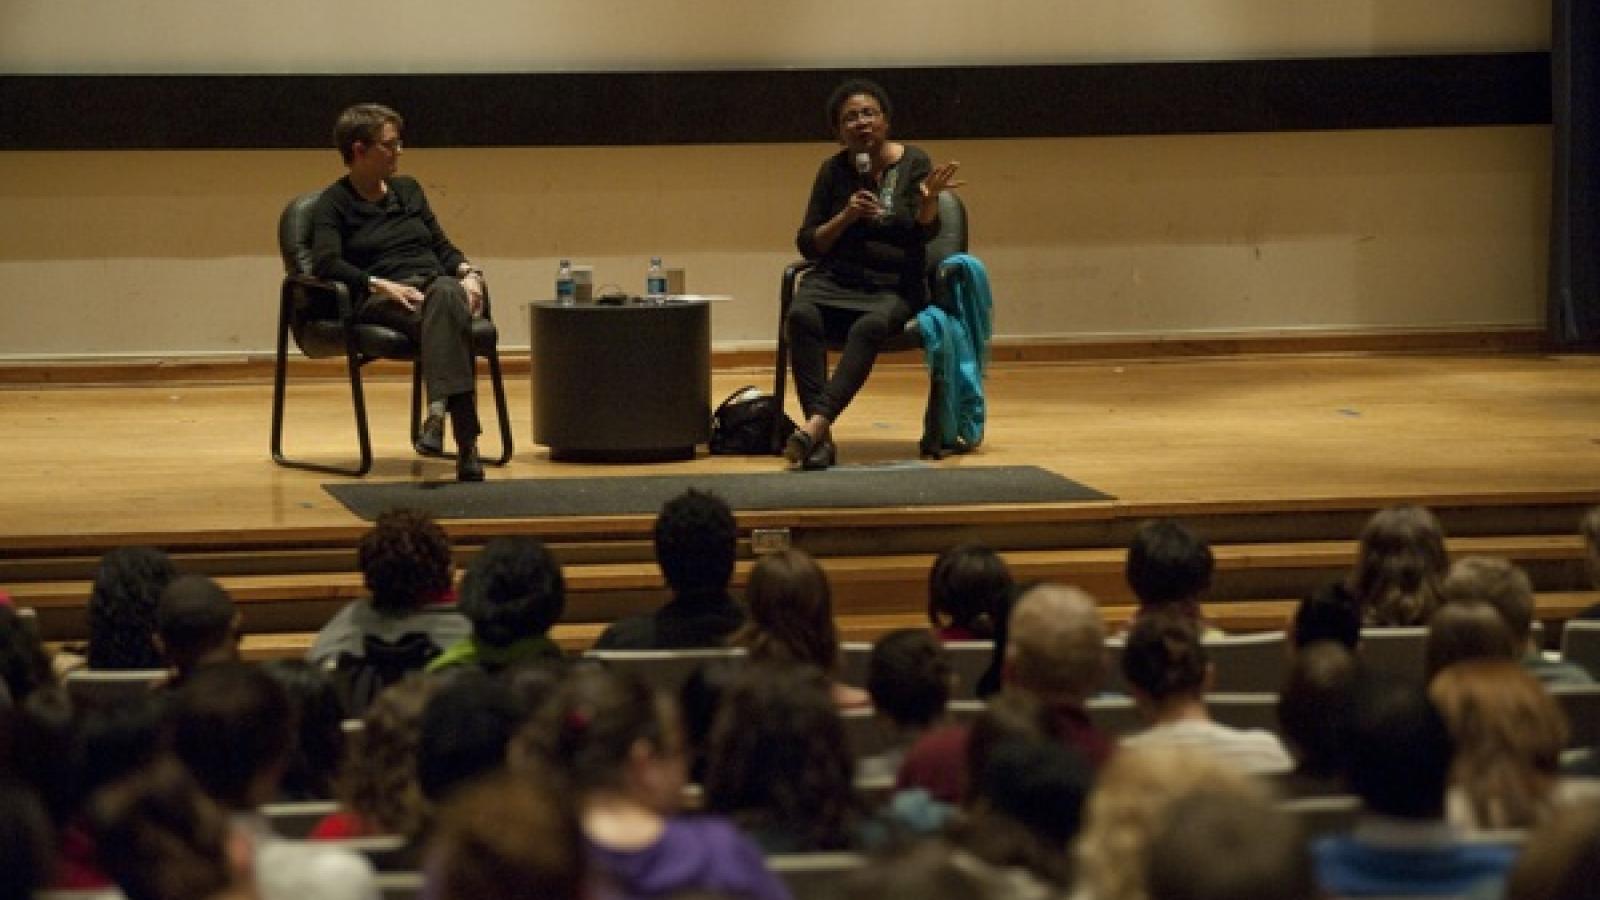 Shannon Winnubst and bell hooks on stage